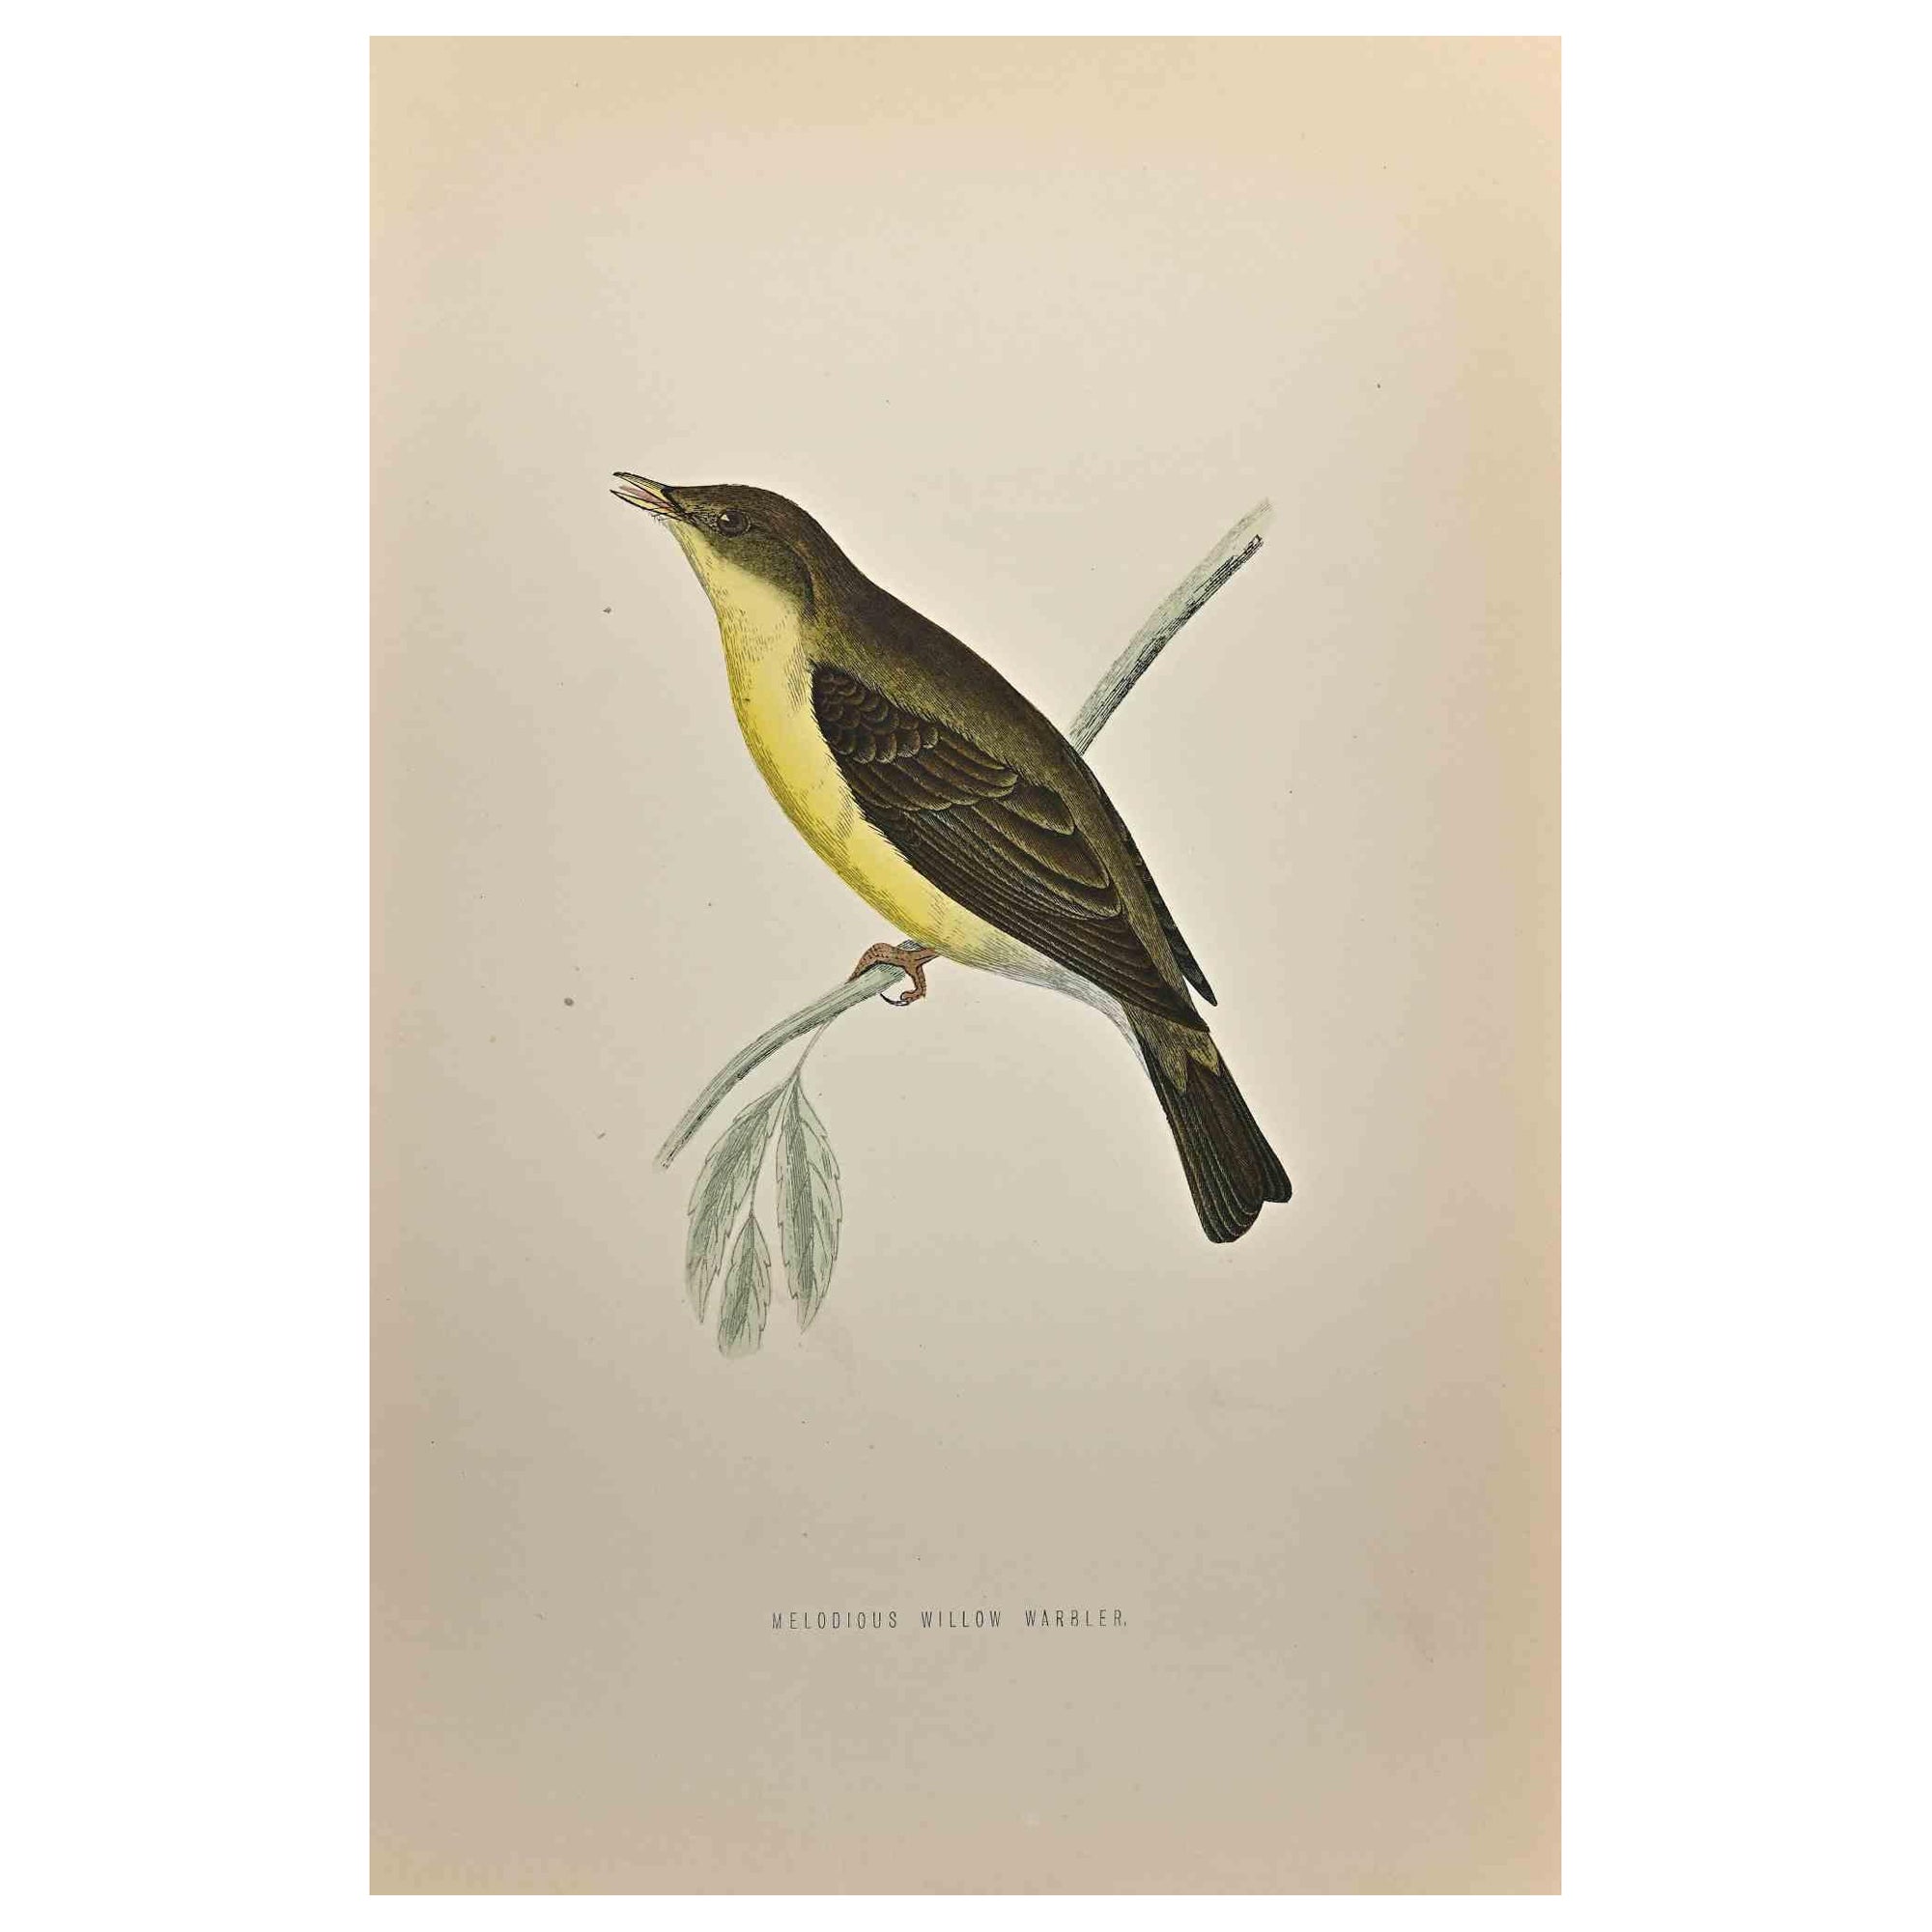 Melodious Willow Warbler is a modern artwork realized in 1870 by the British artist Alexander Francis Lydon (1836-1917) . 

Woodcut print, hand colored, published by London, Bell & Sons, 1870.  Name of the bird printed in plate. This work is part of